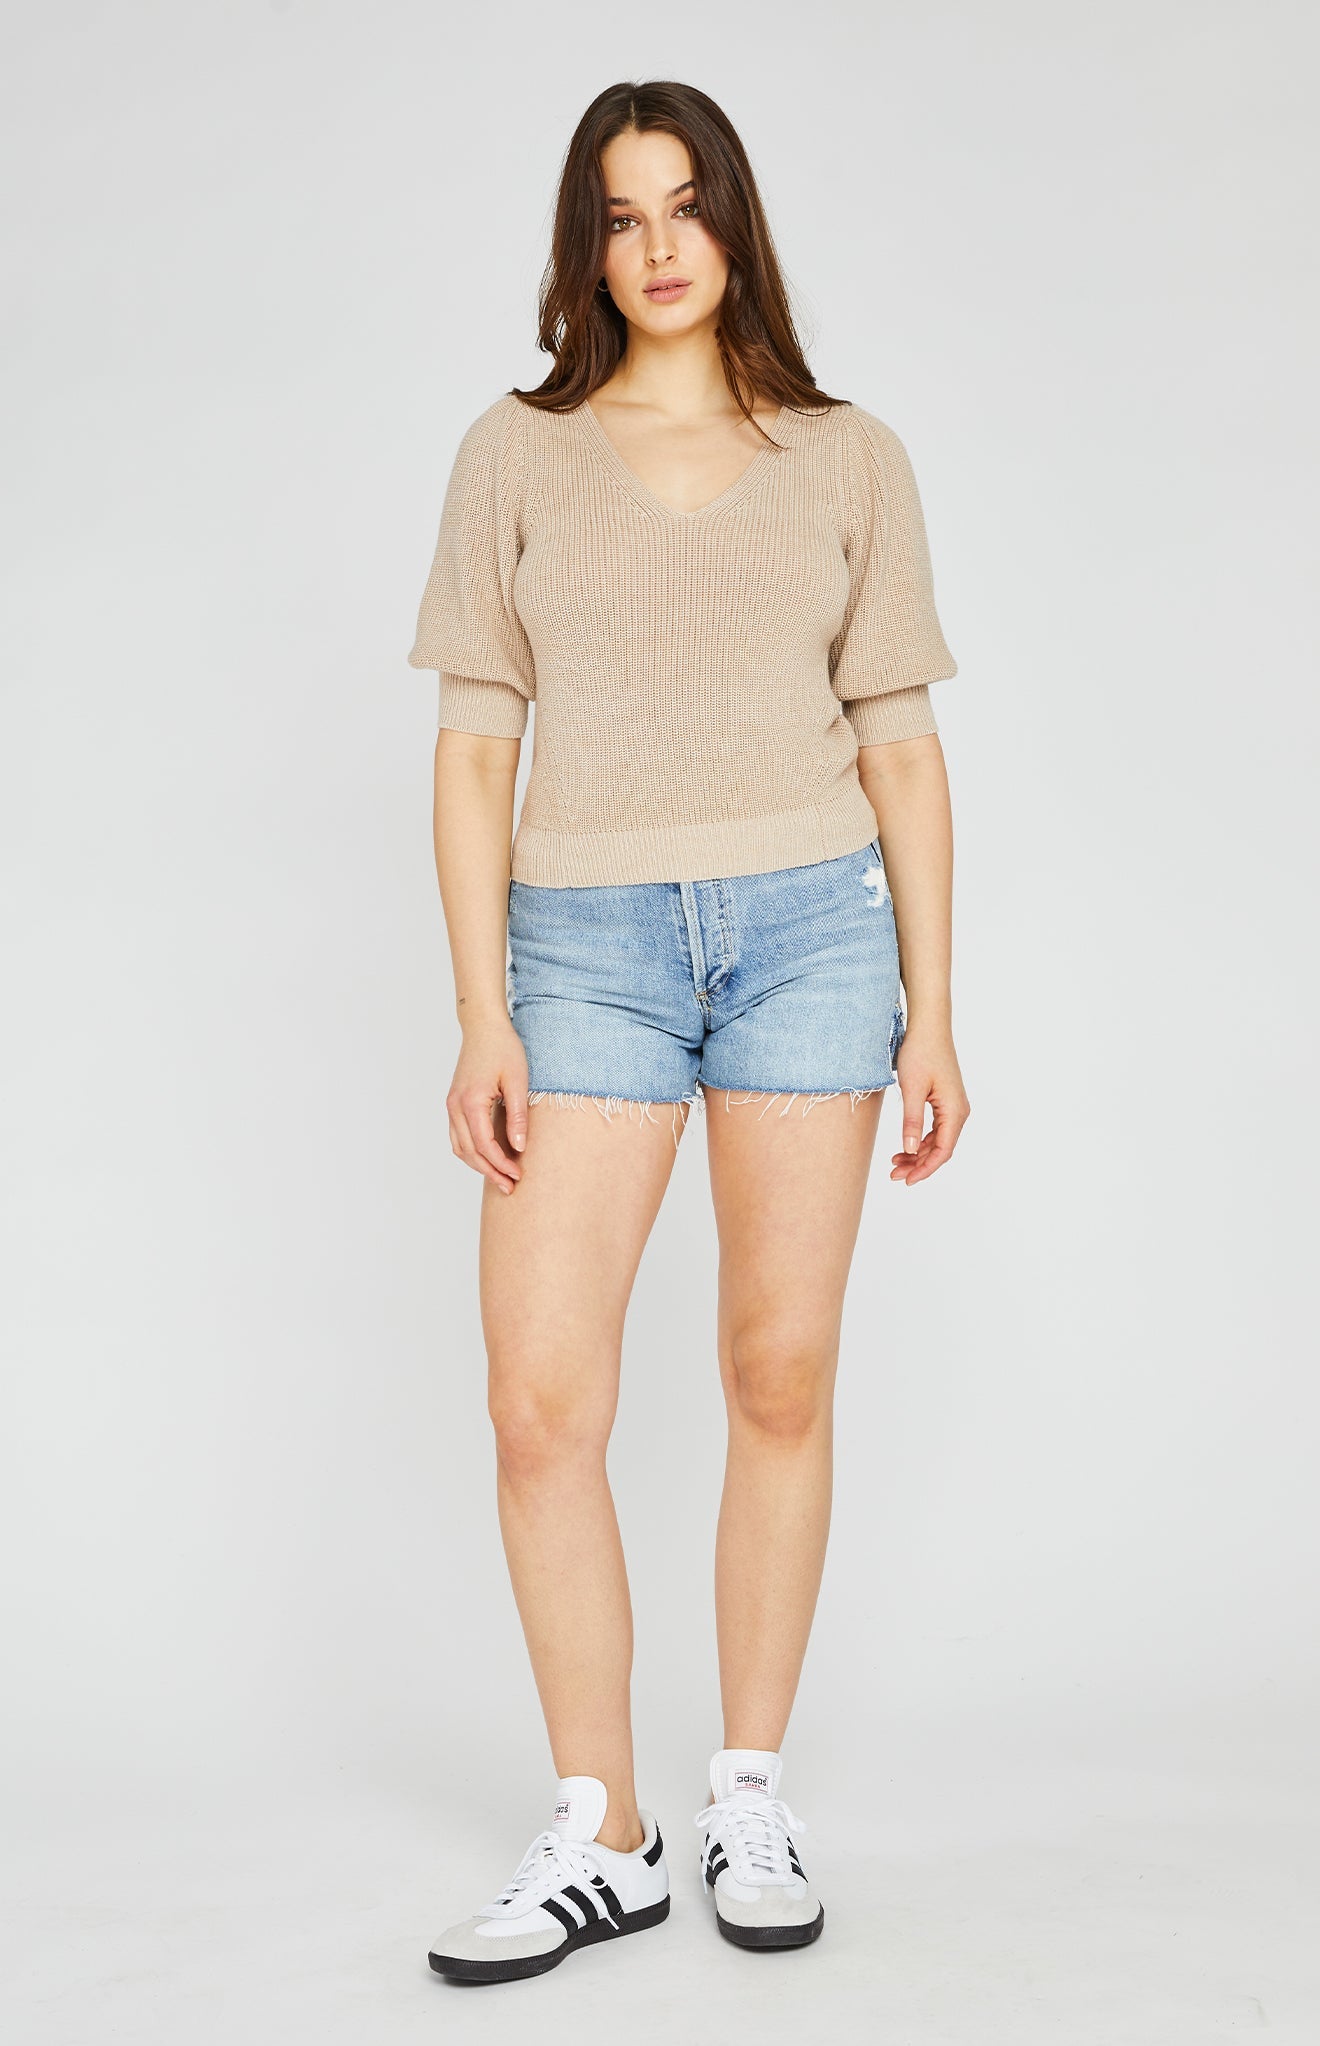 Phoebe Pullover Sweater